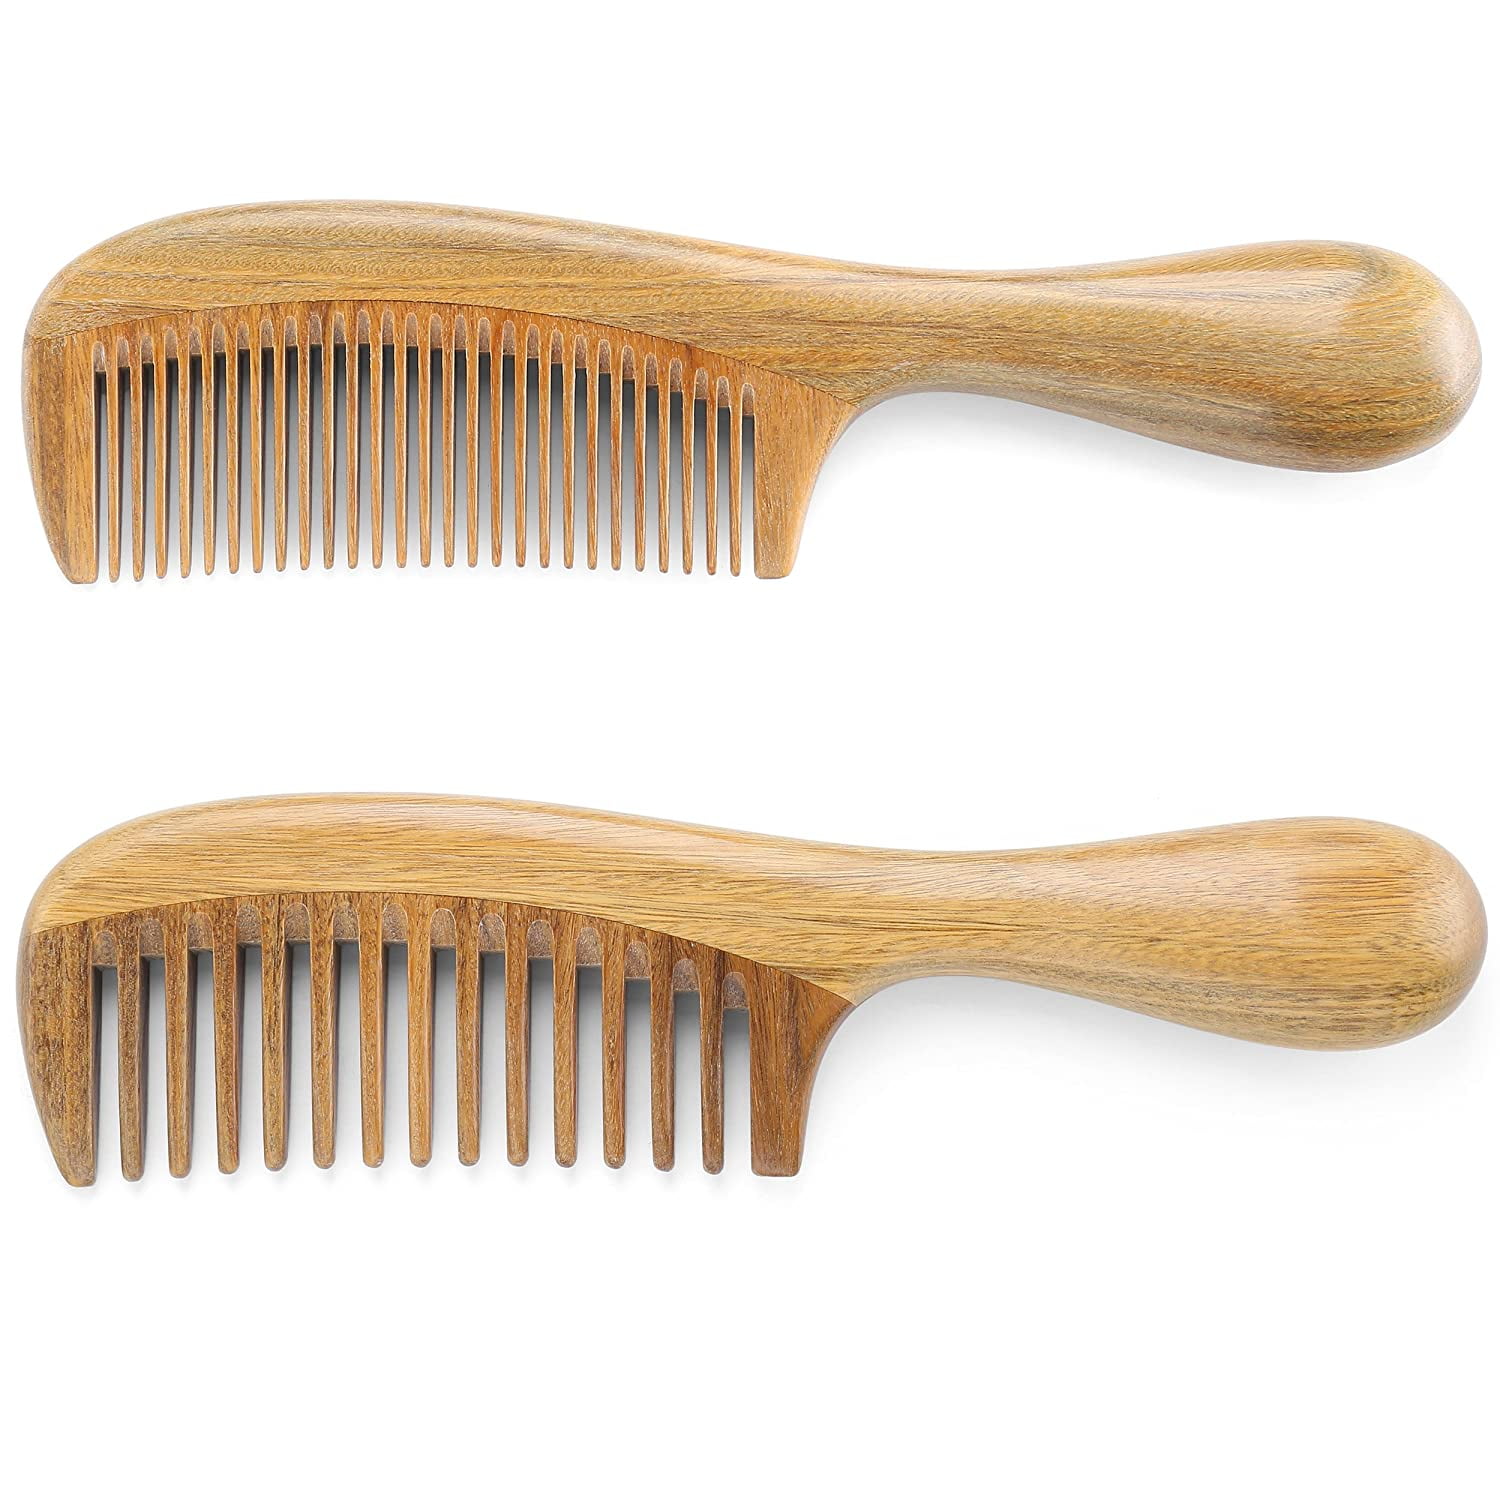 BEINY Natural Green Sandalwood Comb - Anti Static Wooden Hair Comb with  Thickening Round Handle for Hair Health